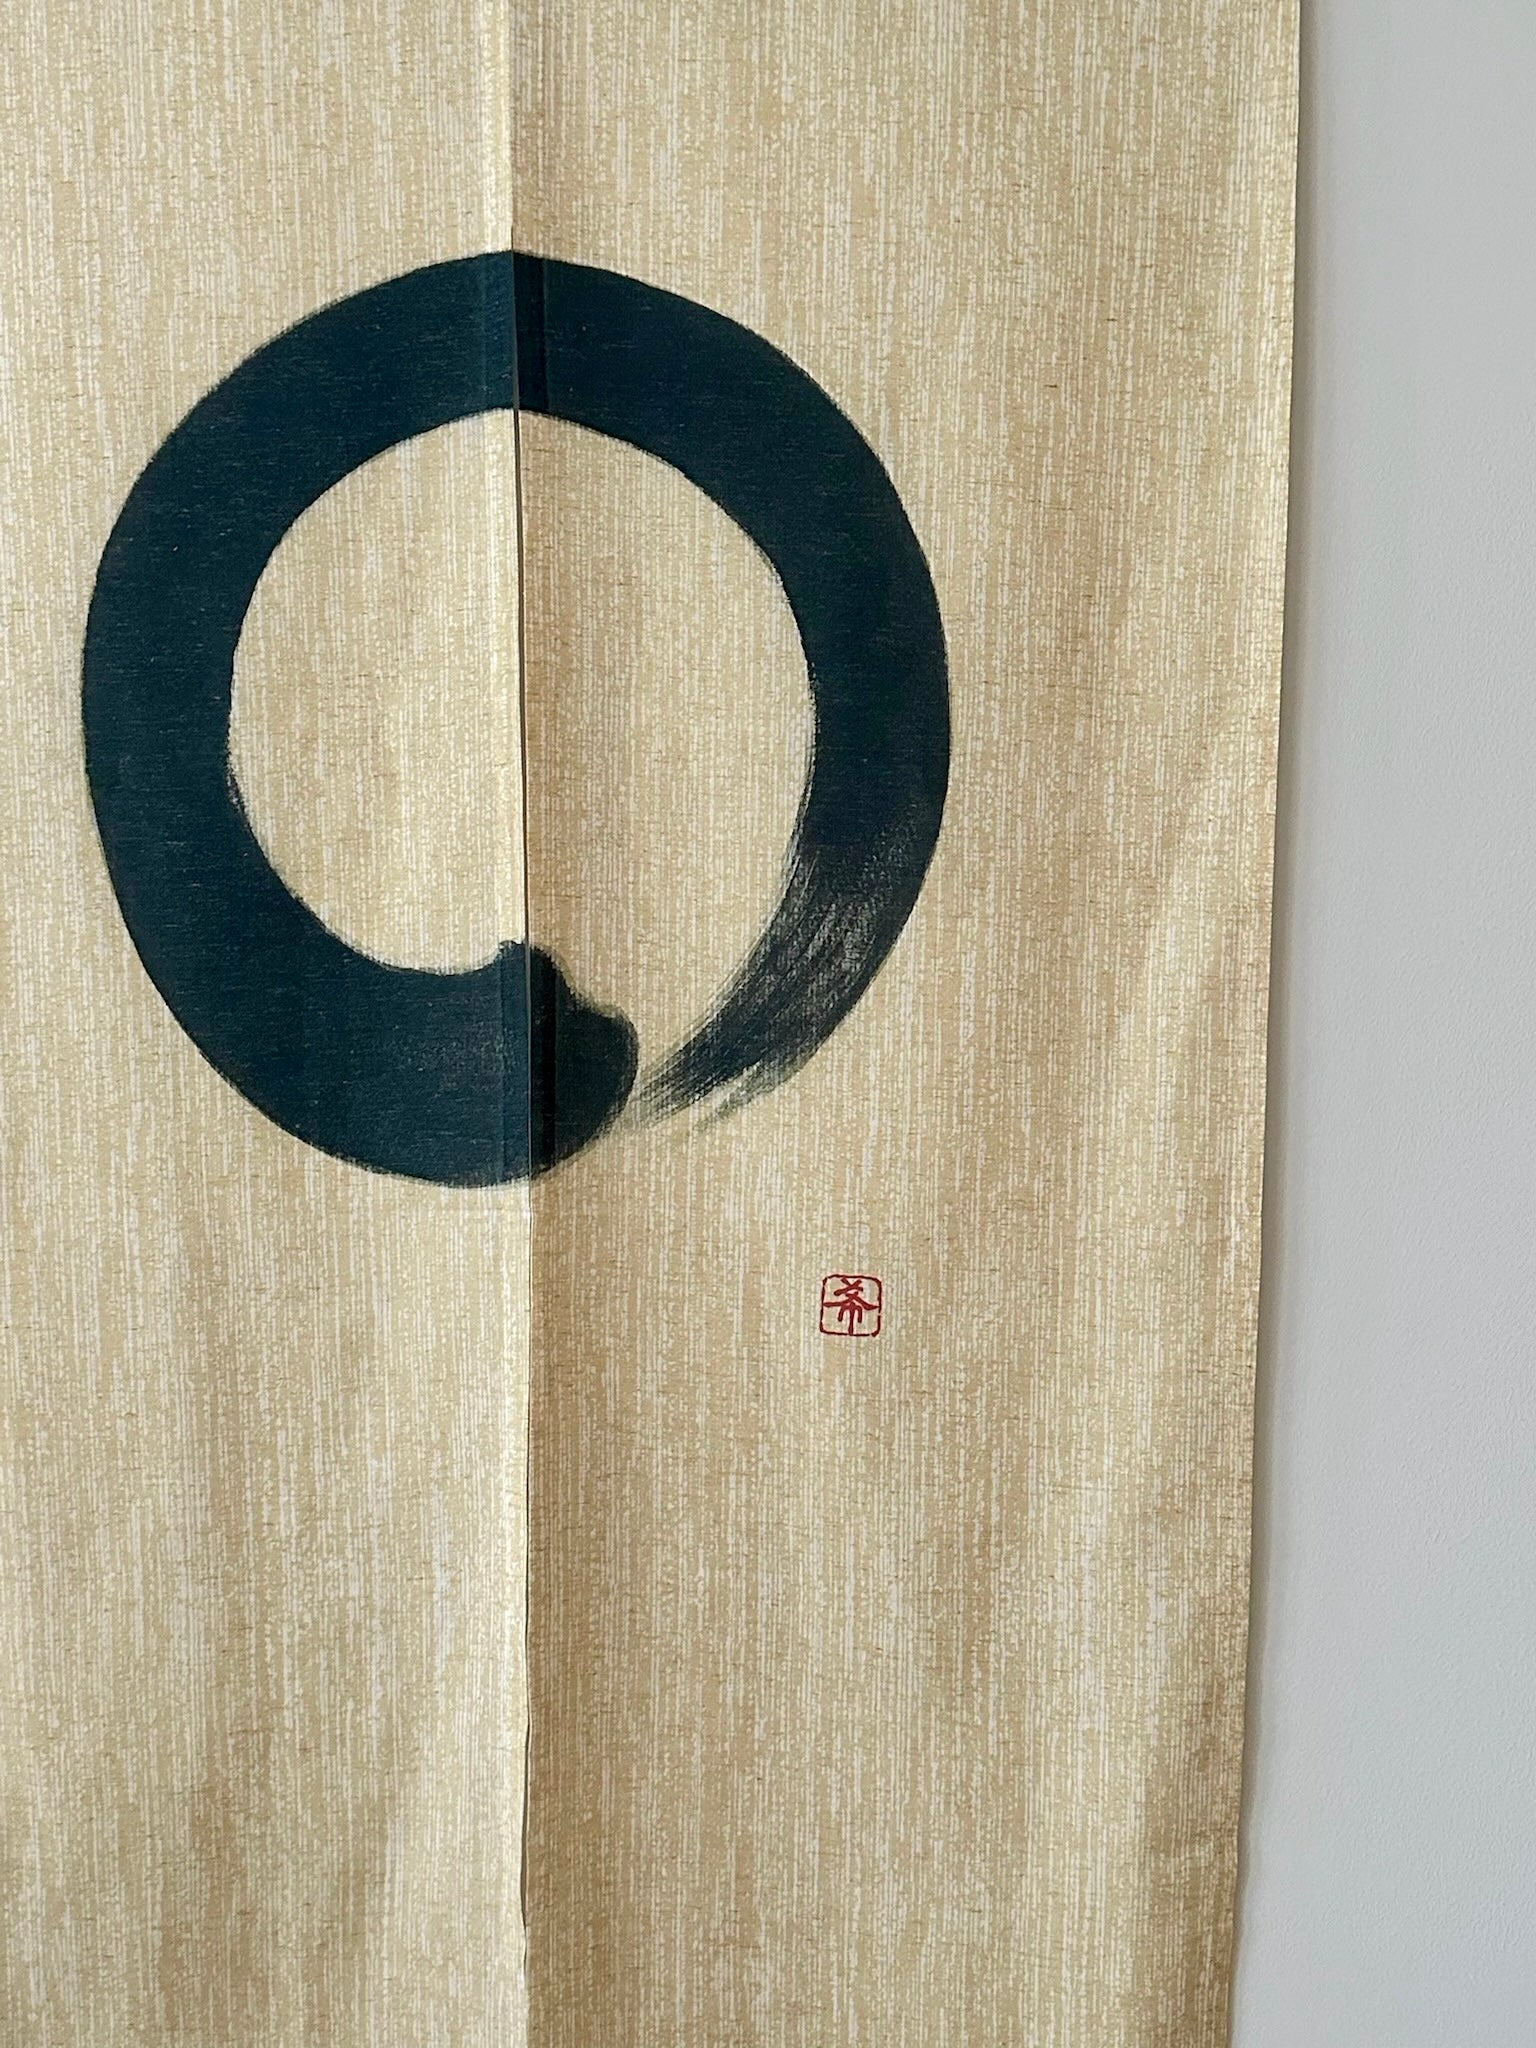 Japanese tapestry with black circle